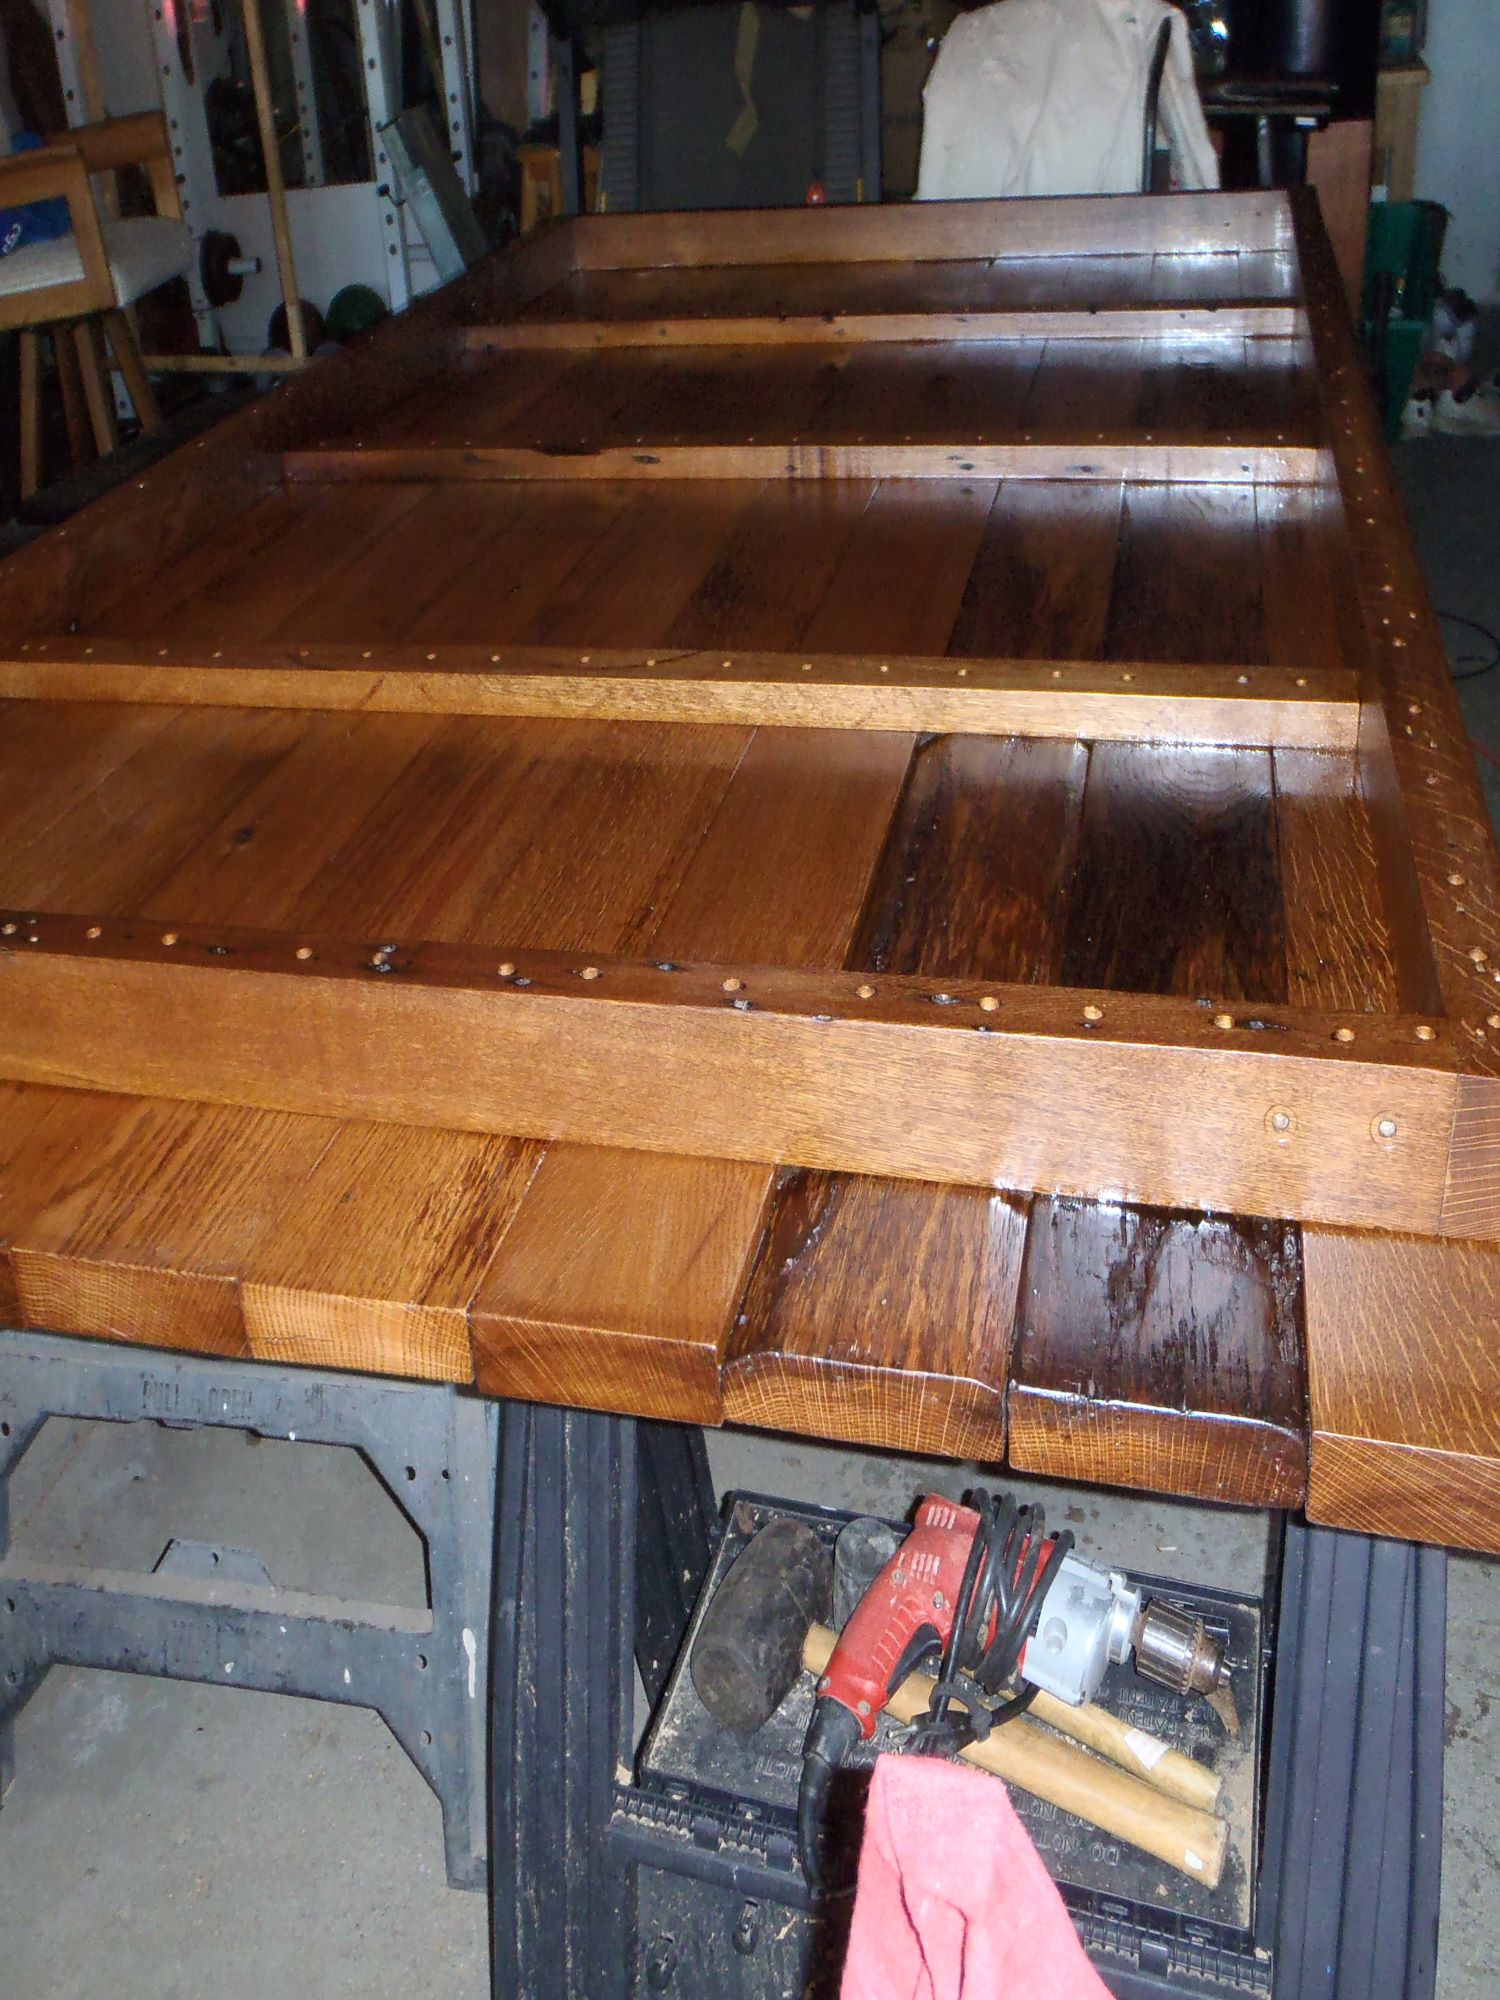 During the creation process of a barnwood table